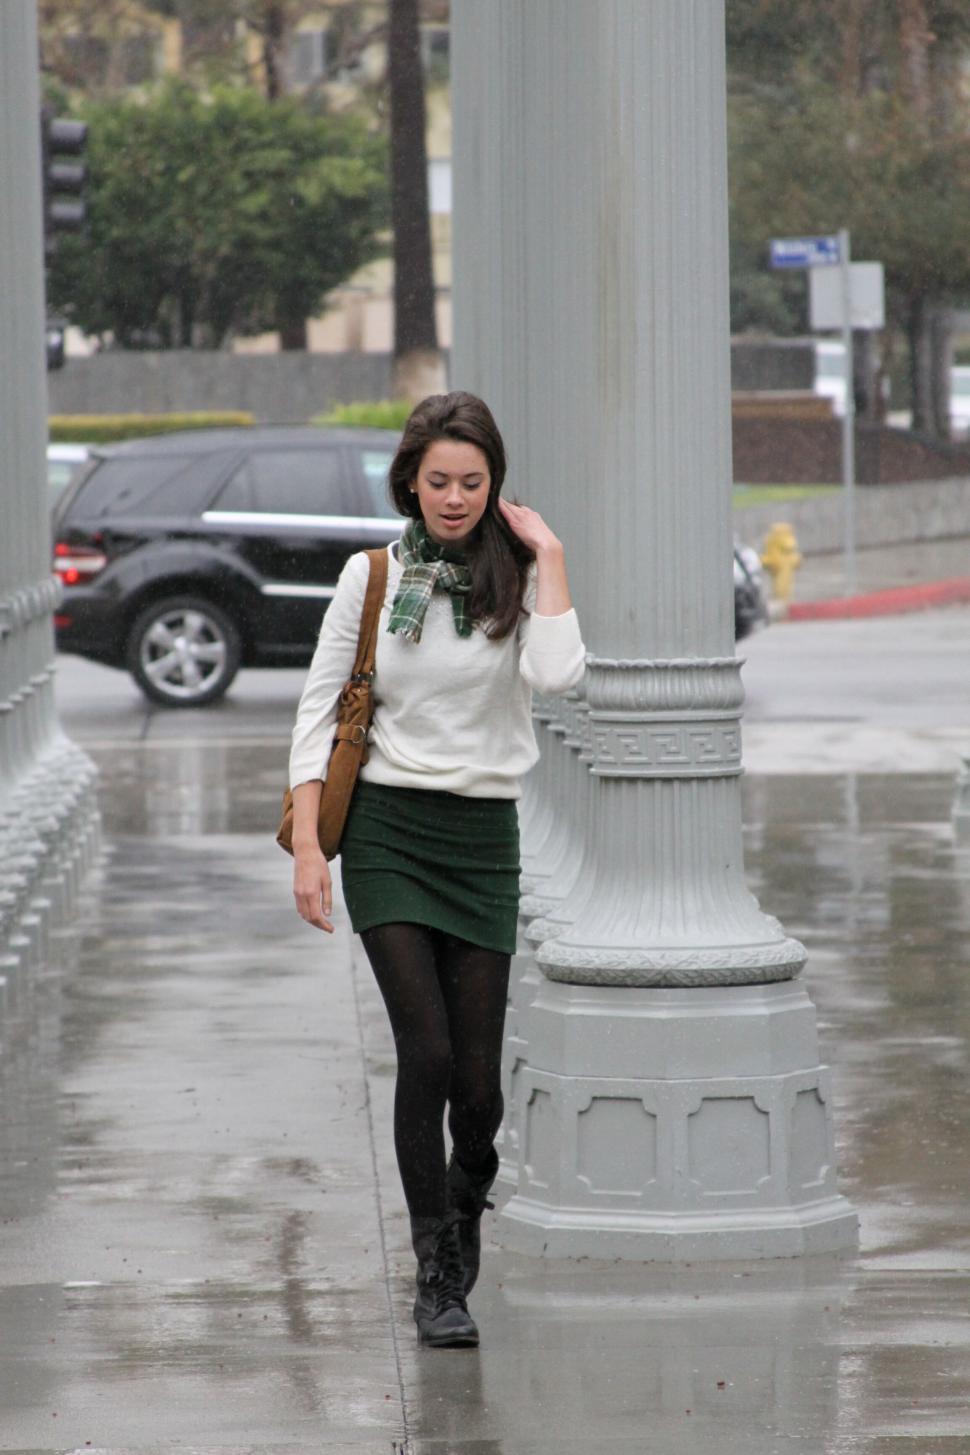 Free Image of Woman walking in rain by classical columns 